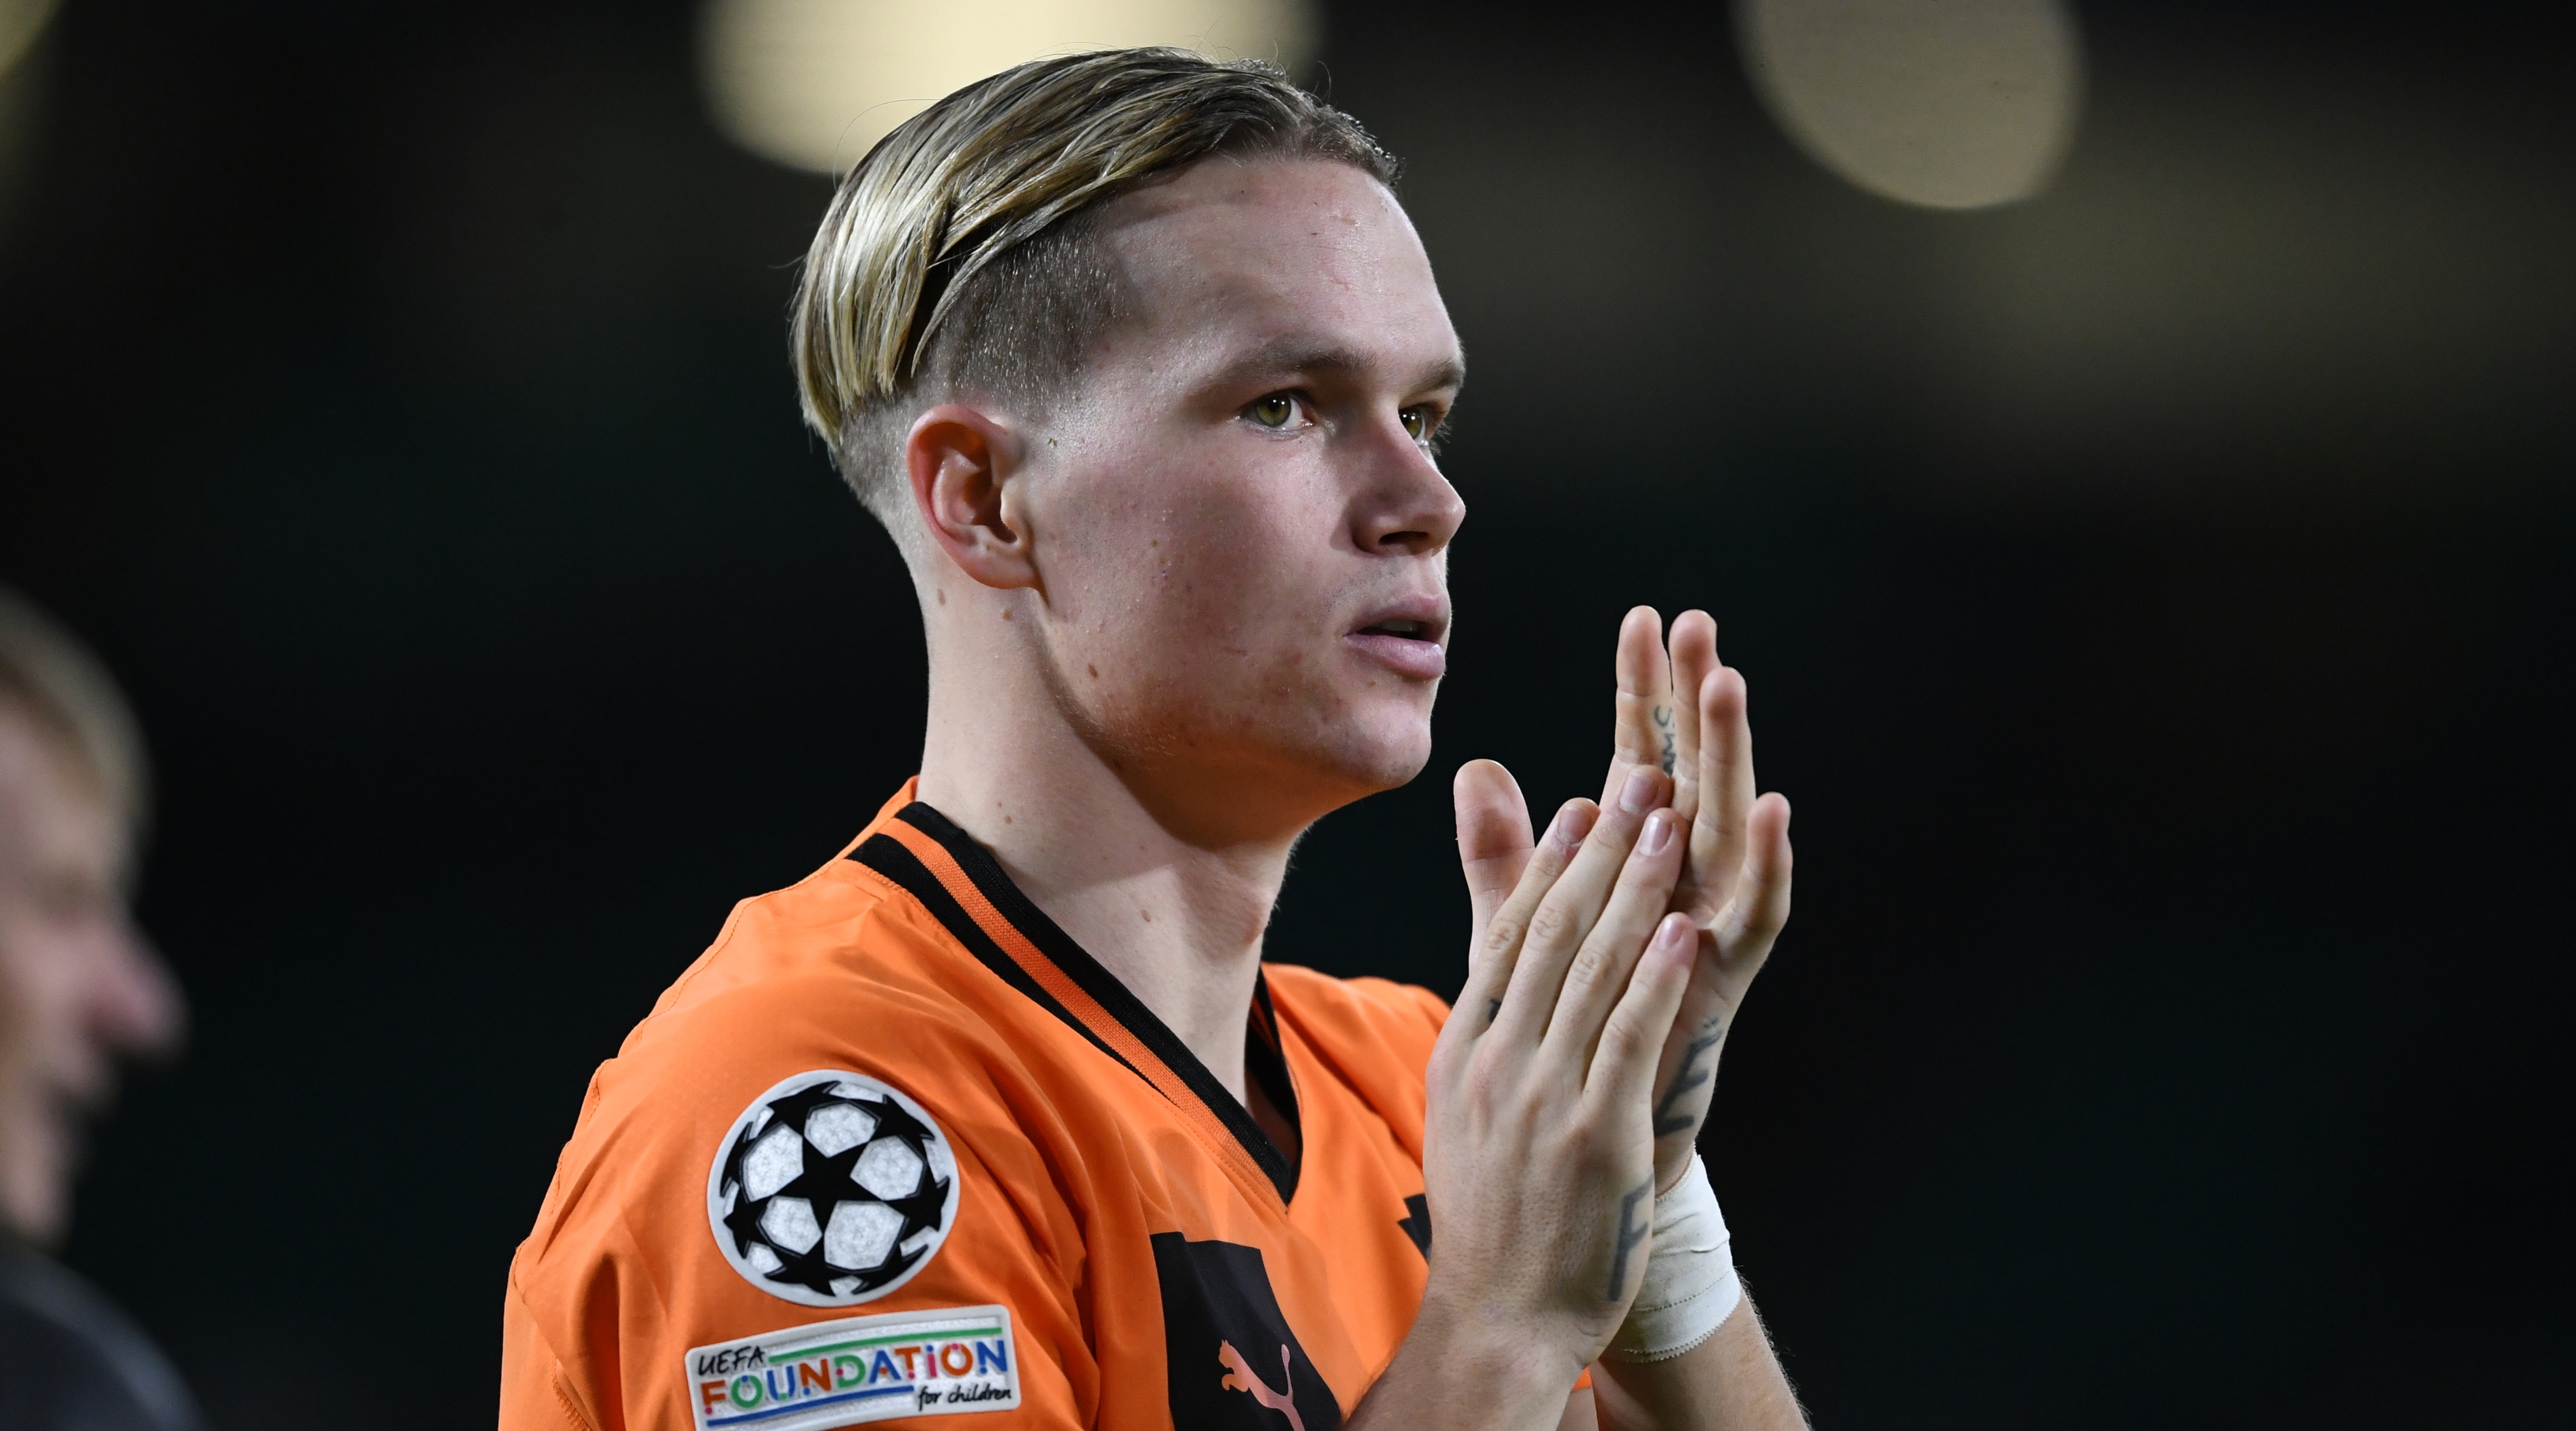 Shakhtar Donetsk's Mykhaylo Mudryk applauds during the full UEFA Champions League match between Celtic and Shakhtar Donetsk on October 25, 2022 at Celtic Park in Glasgow, United Kingdom.